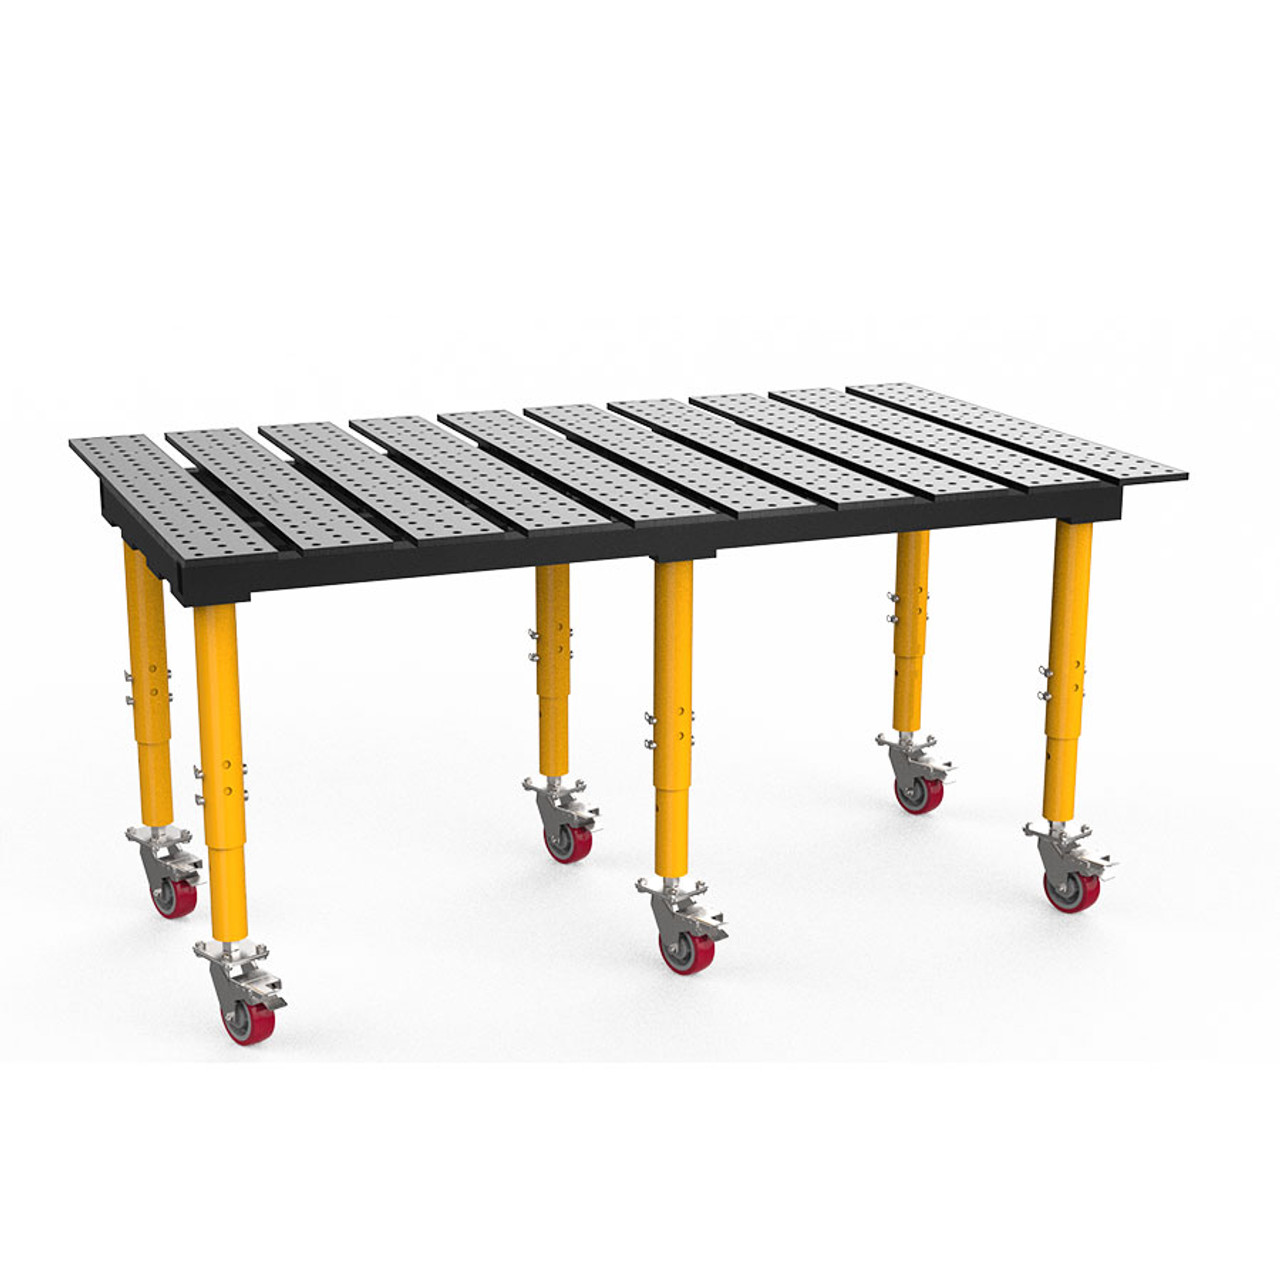 HEAVY DUTY WELDING TABLES, Size W x D x H: 144 x 48 x 36, Top: 1/2,  Optional Casters: Included